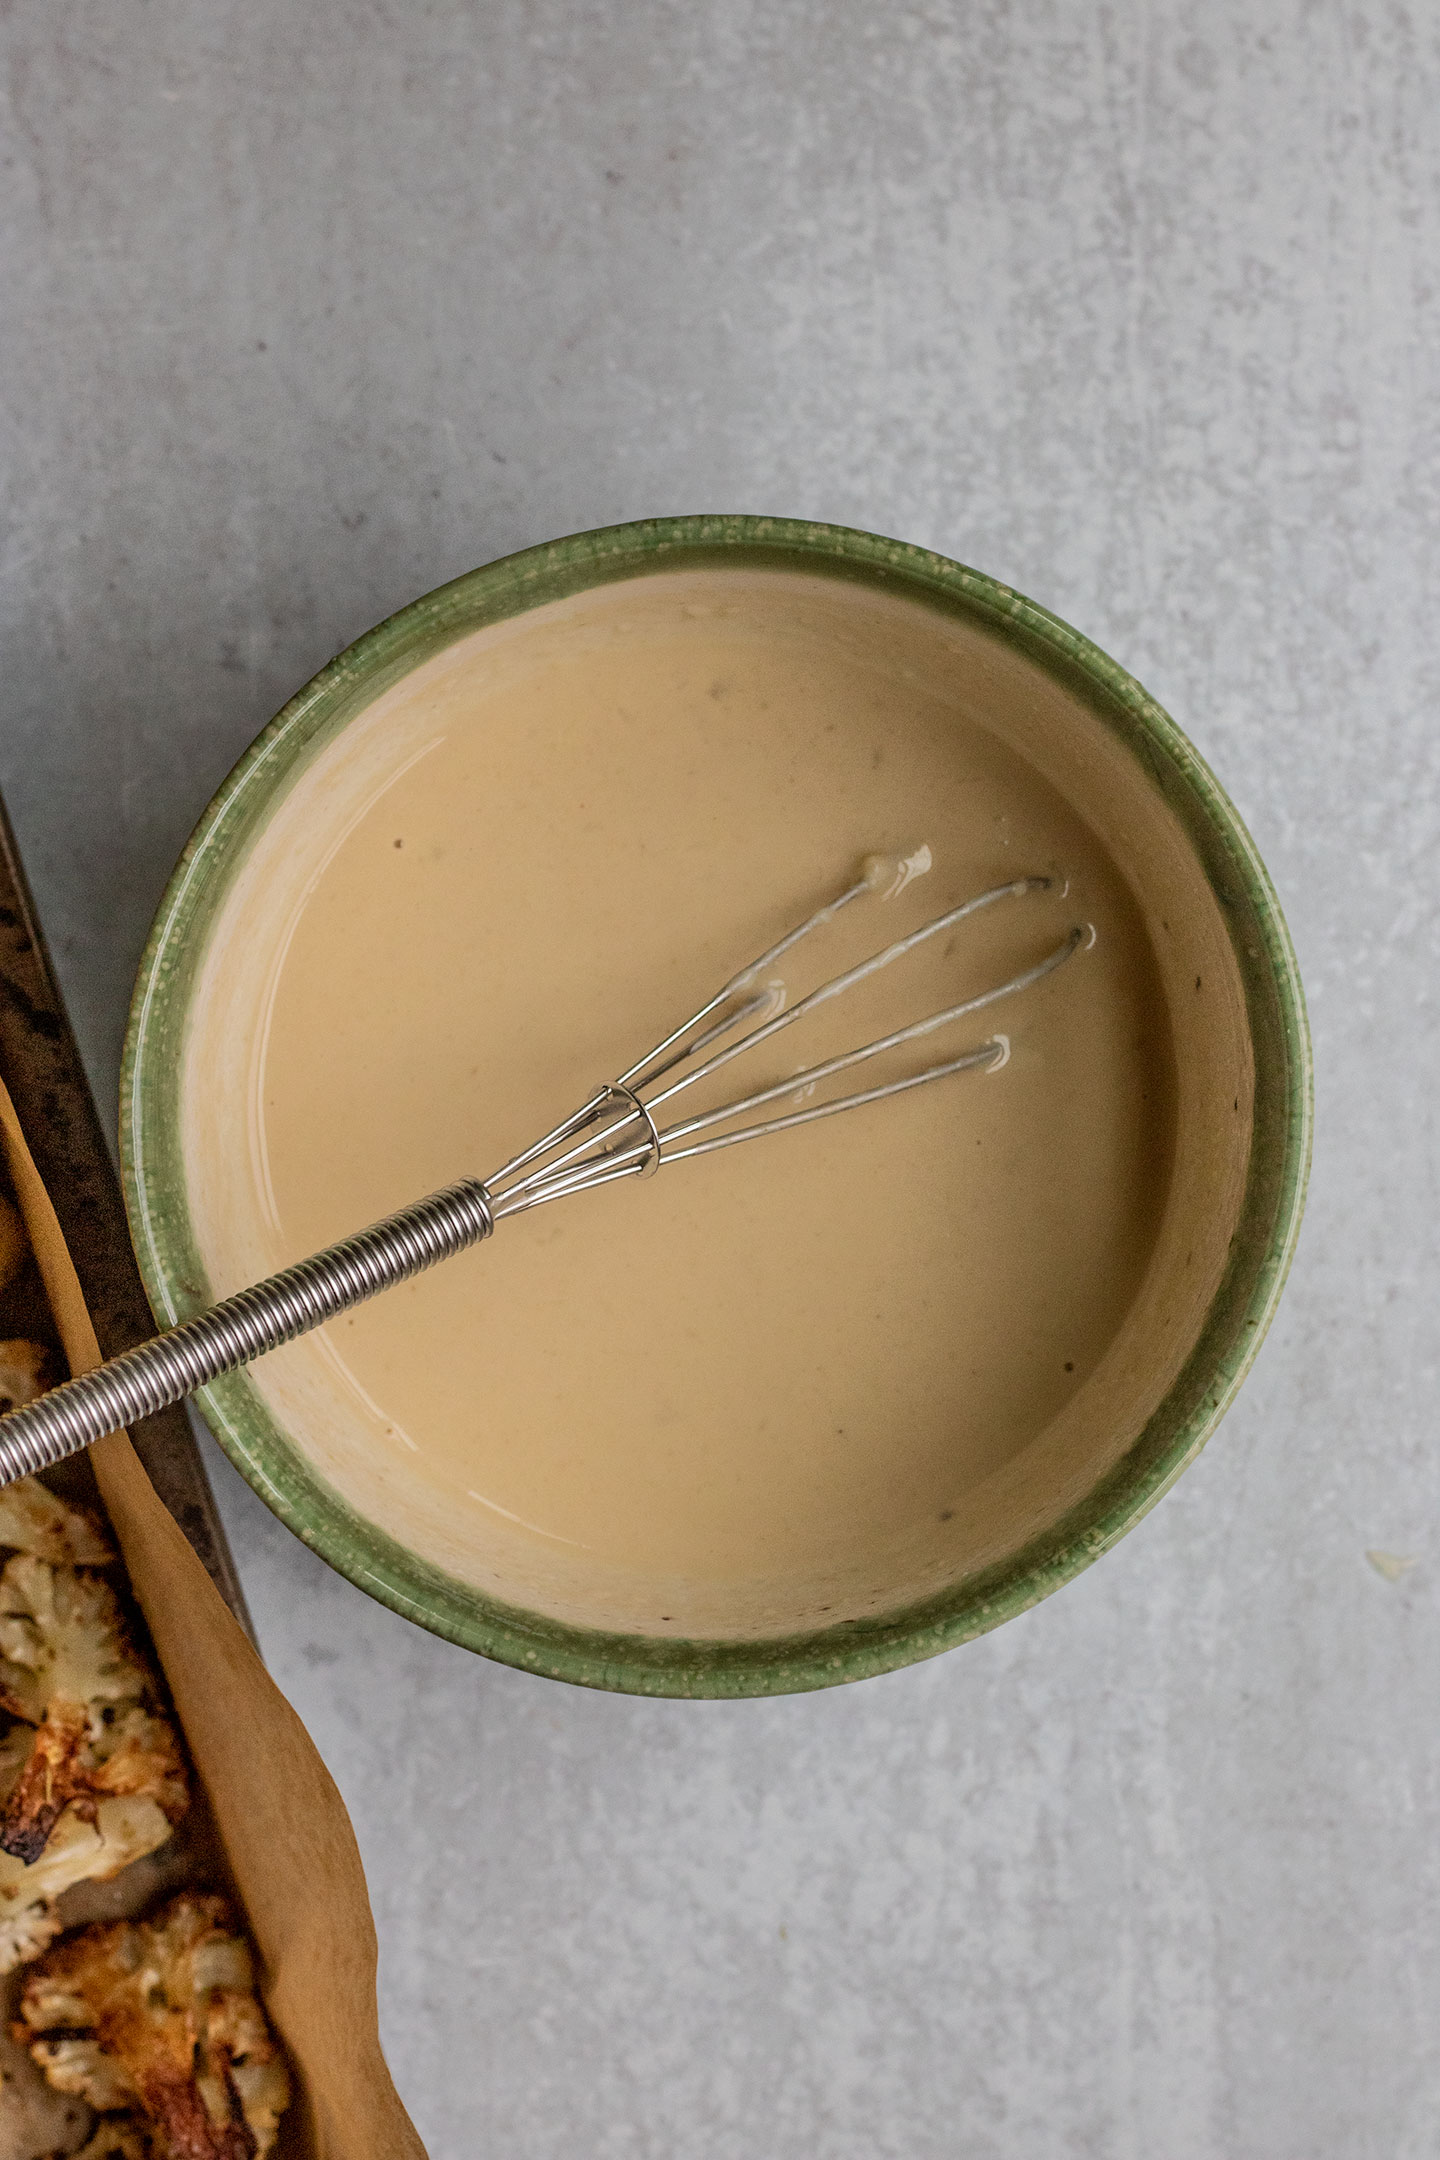 Mixing the garlic and miso tahini dressing with a small whisk in a bowl.